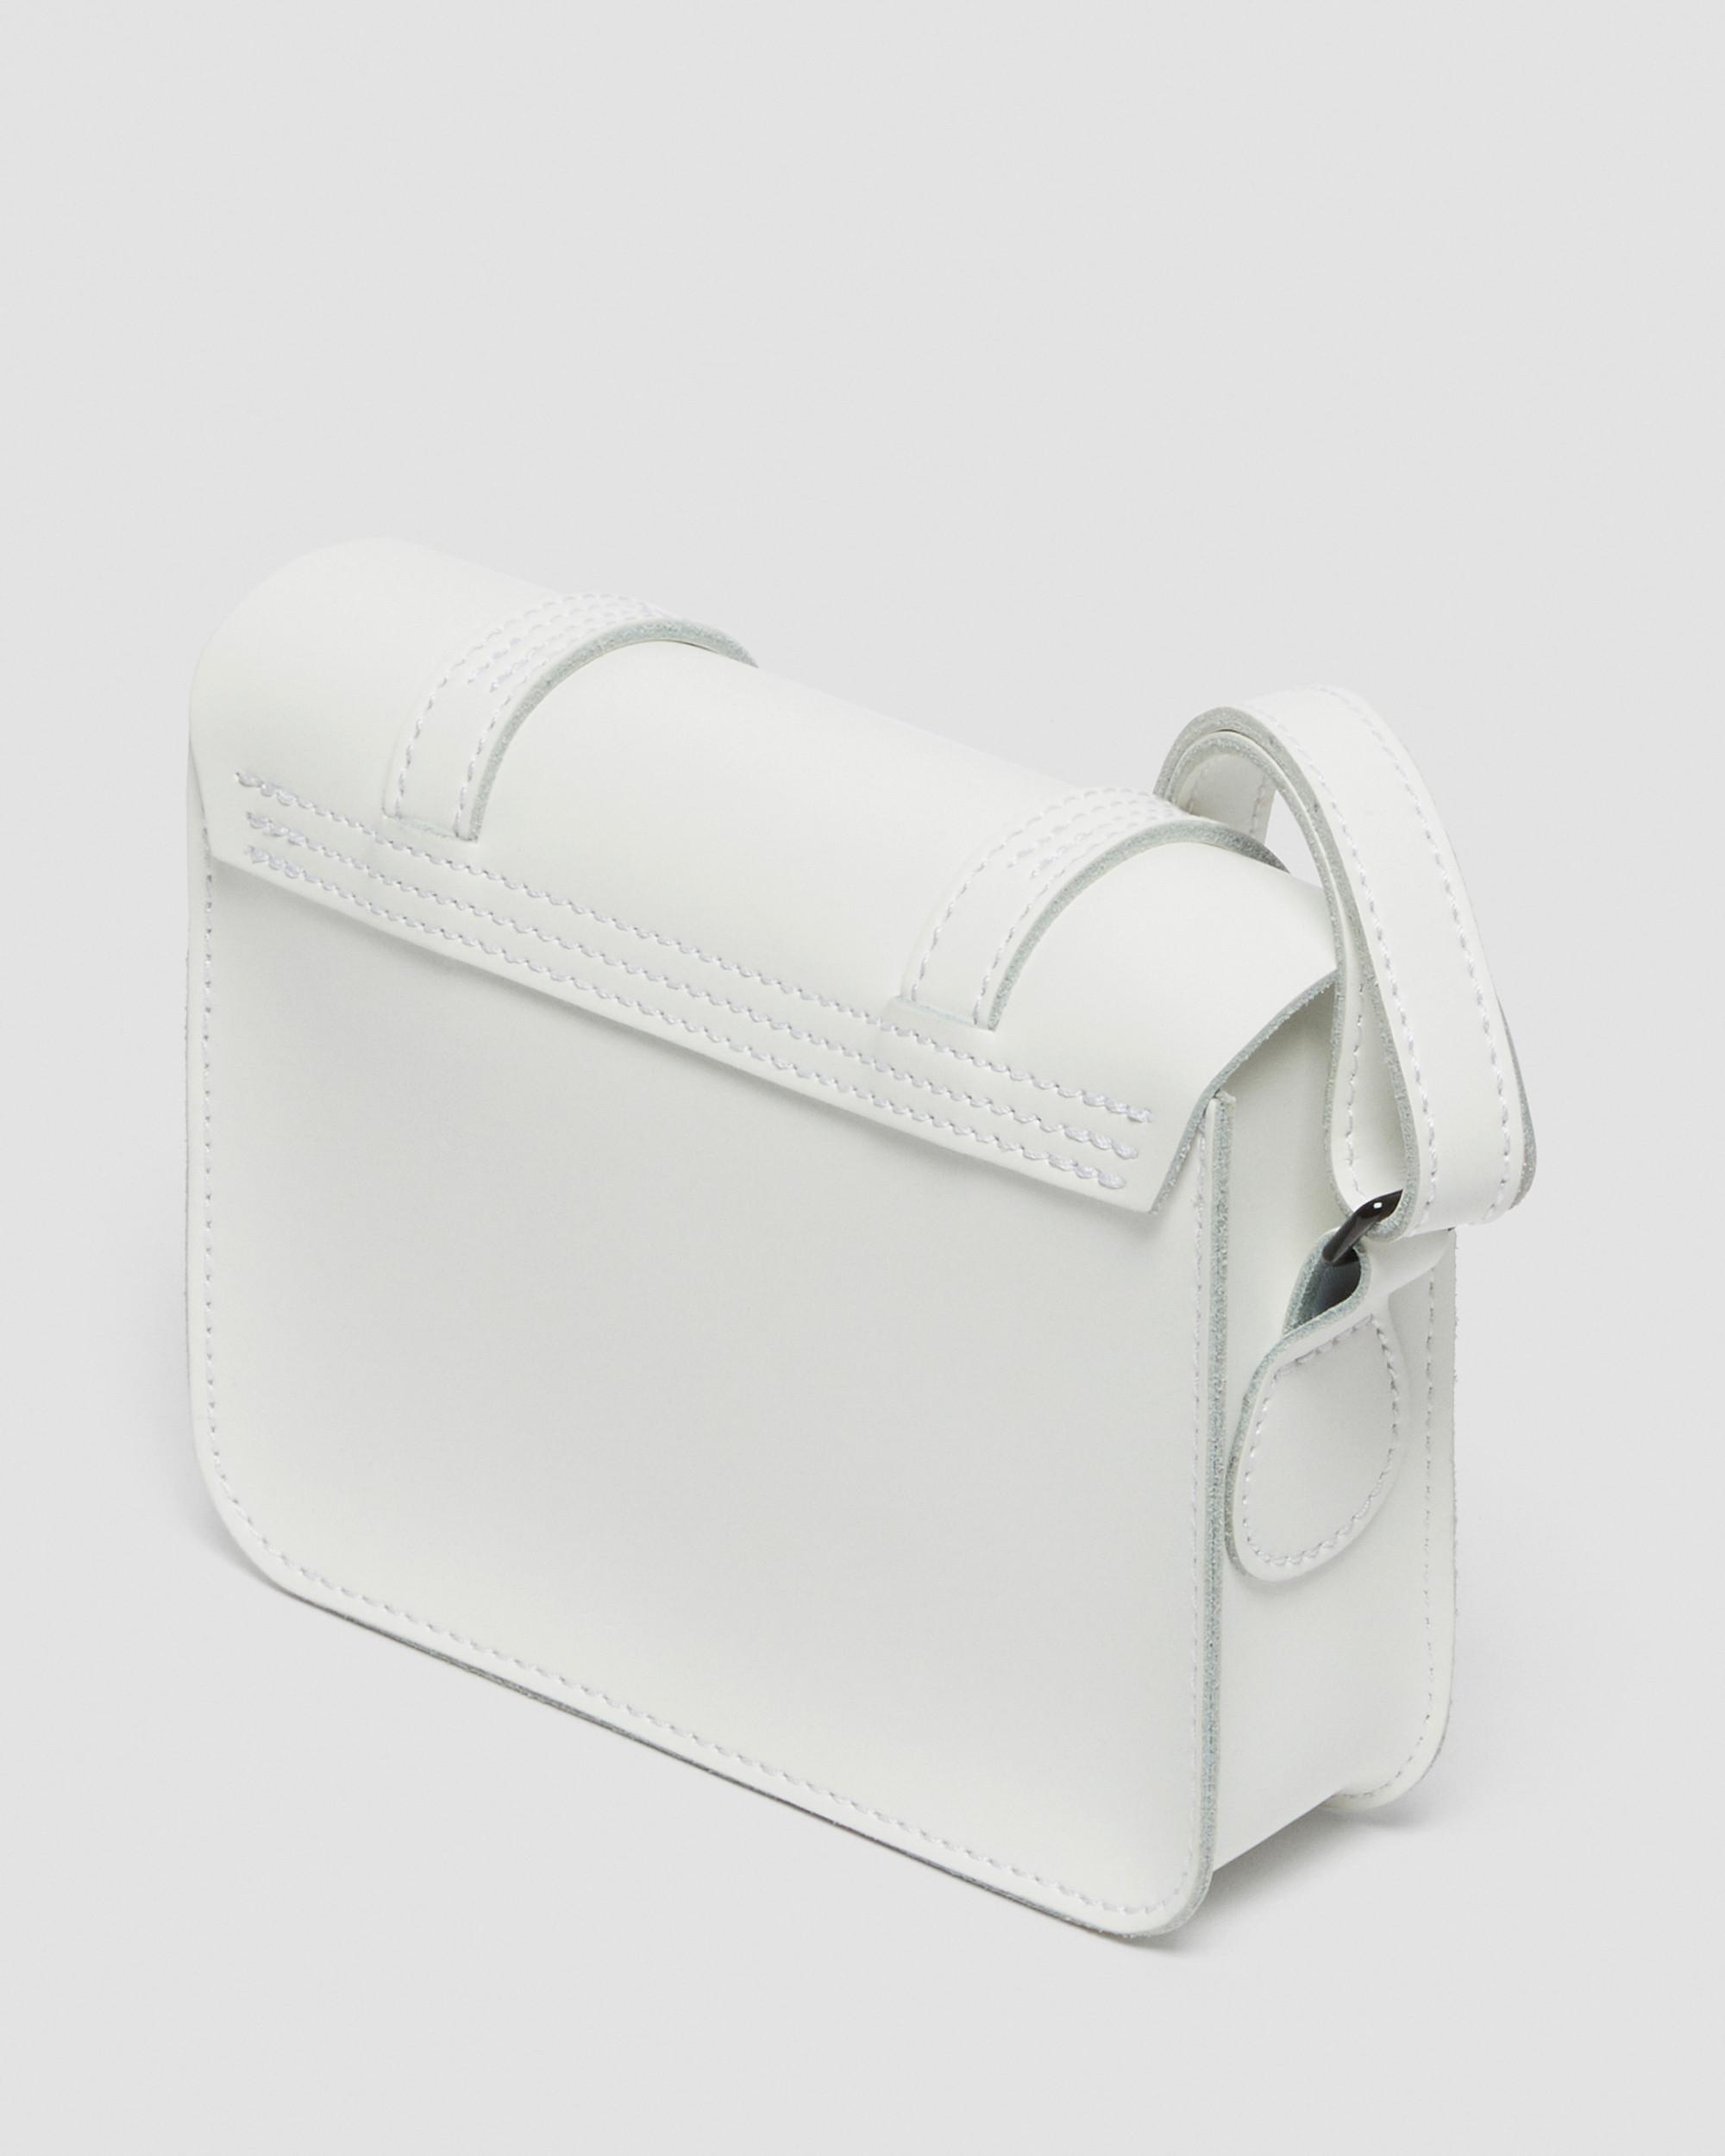 Dr.Martens New Arrival's Crossbody Bag White/Maroon Color 2022 